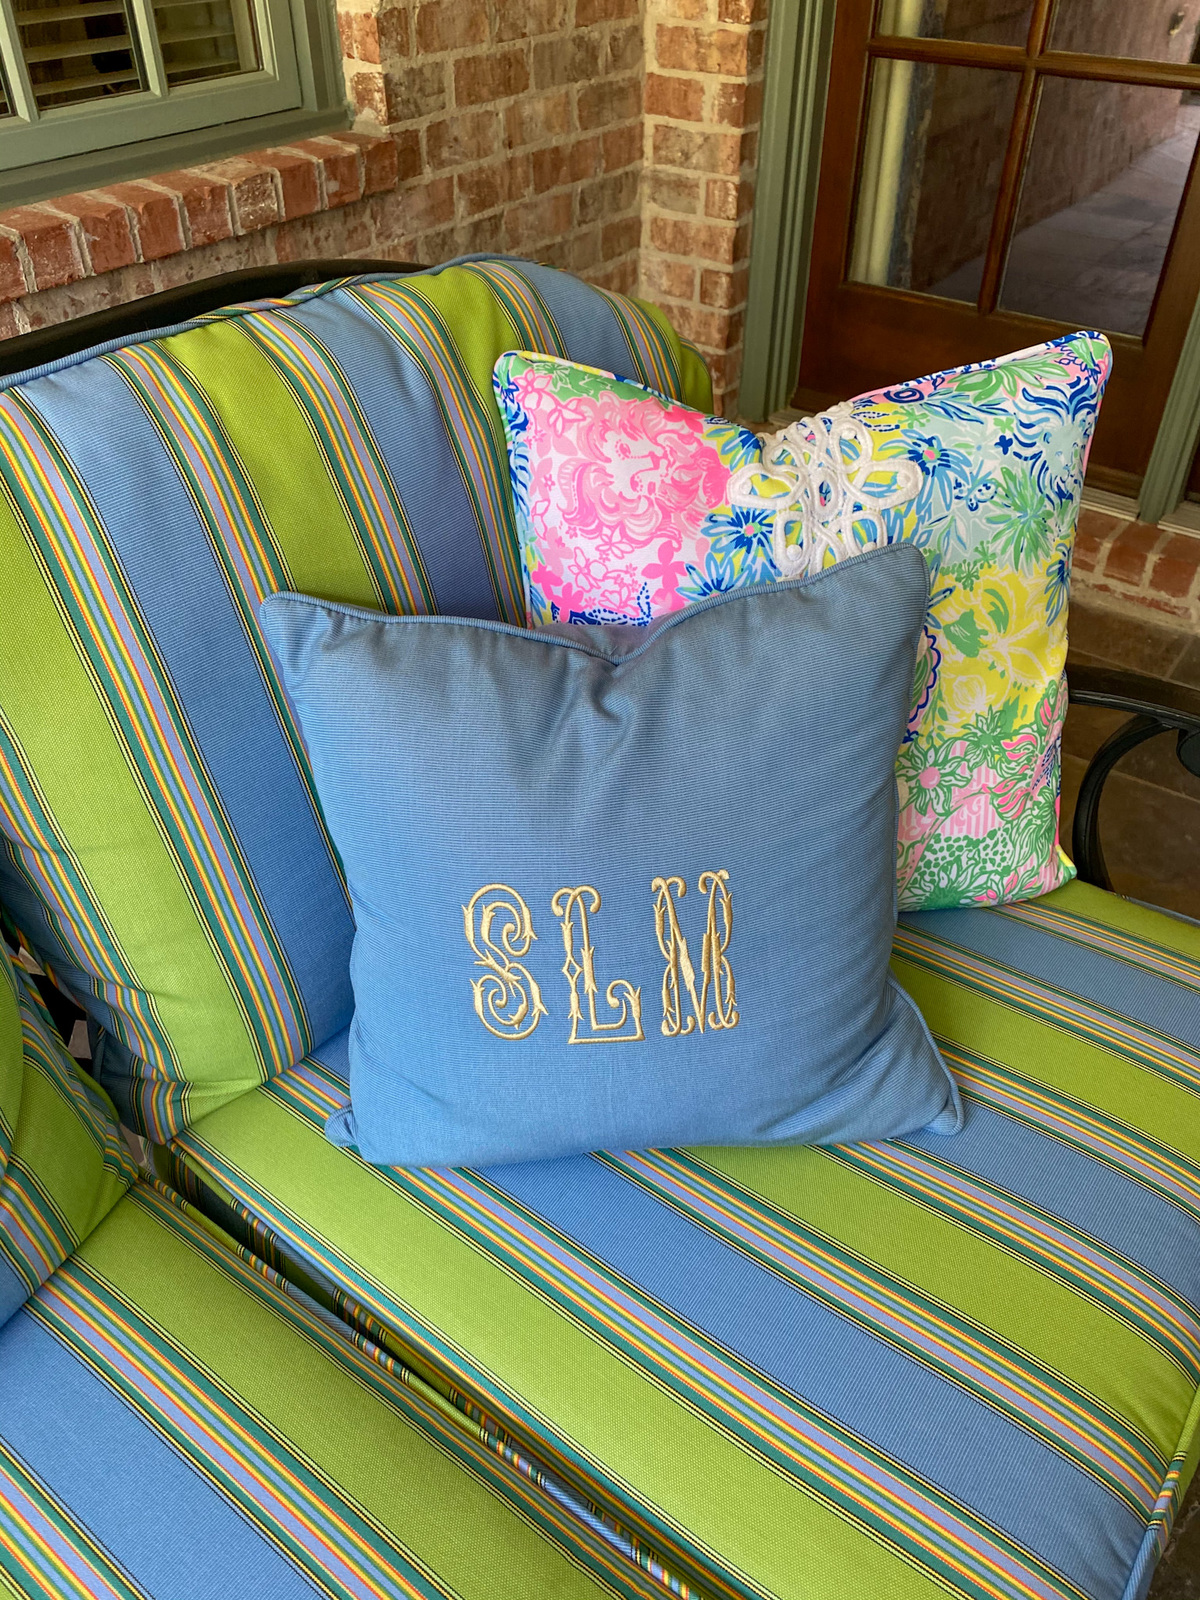 frontgate blue monogrammed square pillow sitting on striped cushion patio furniture